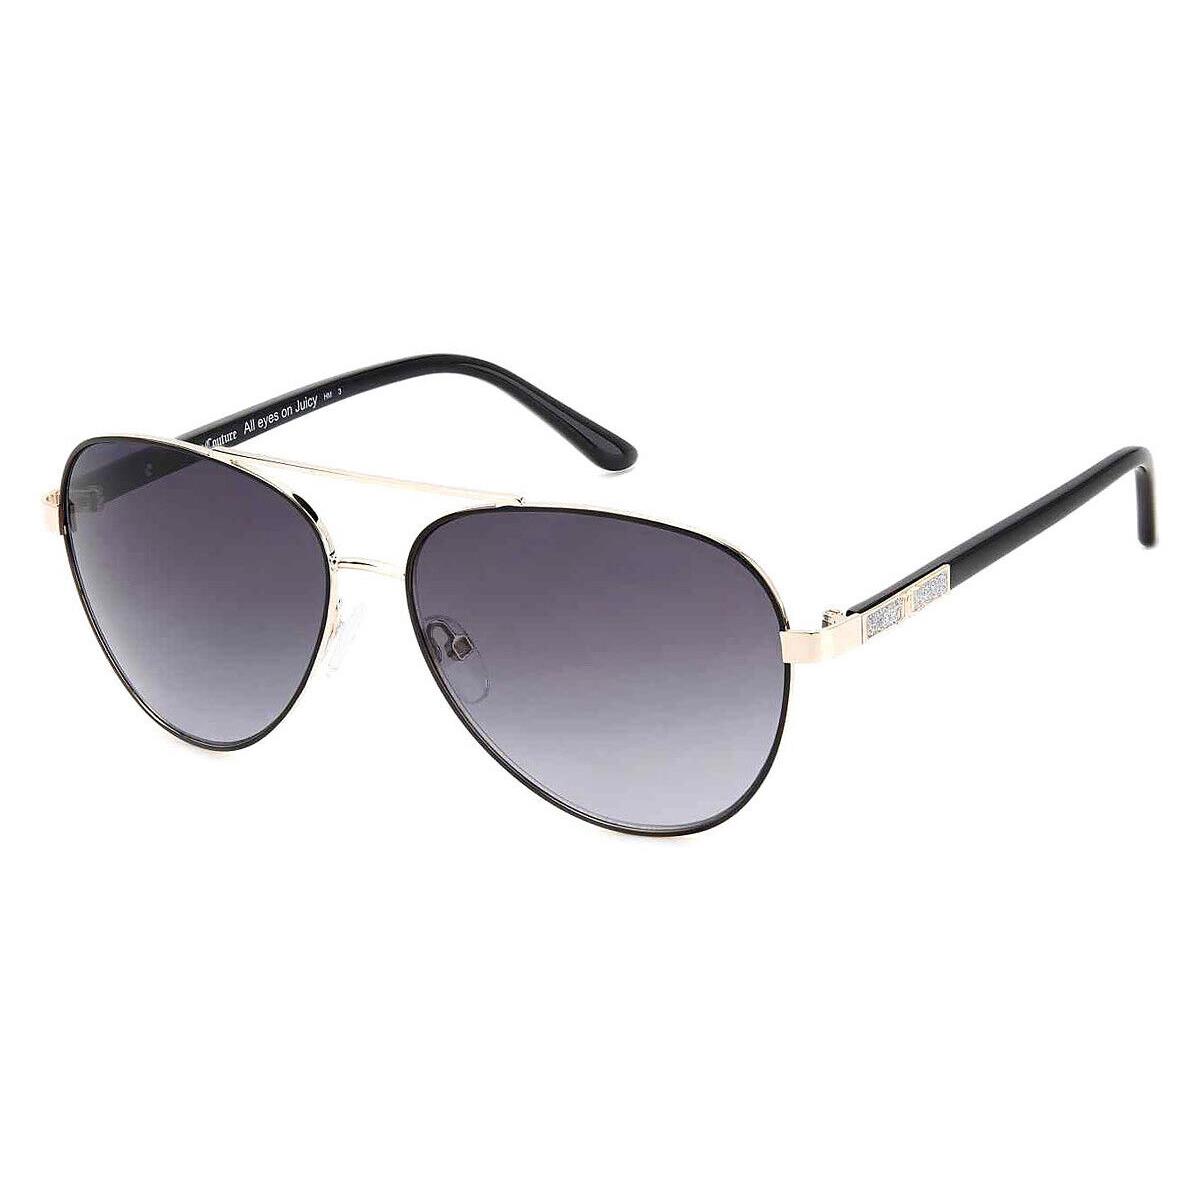 Juicy Couture Juc Sunglasses Matte Black / Gray Shaded 58mm - Frame: Matte Black / Gray Shaded, Lens: Gray Shaded